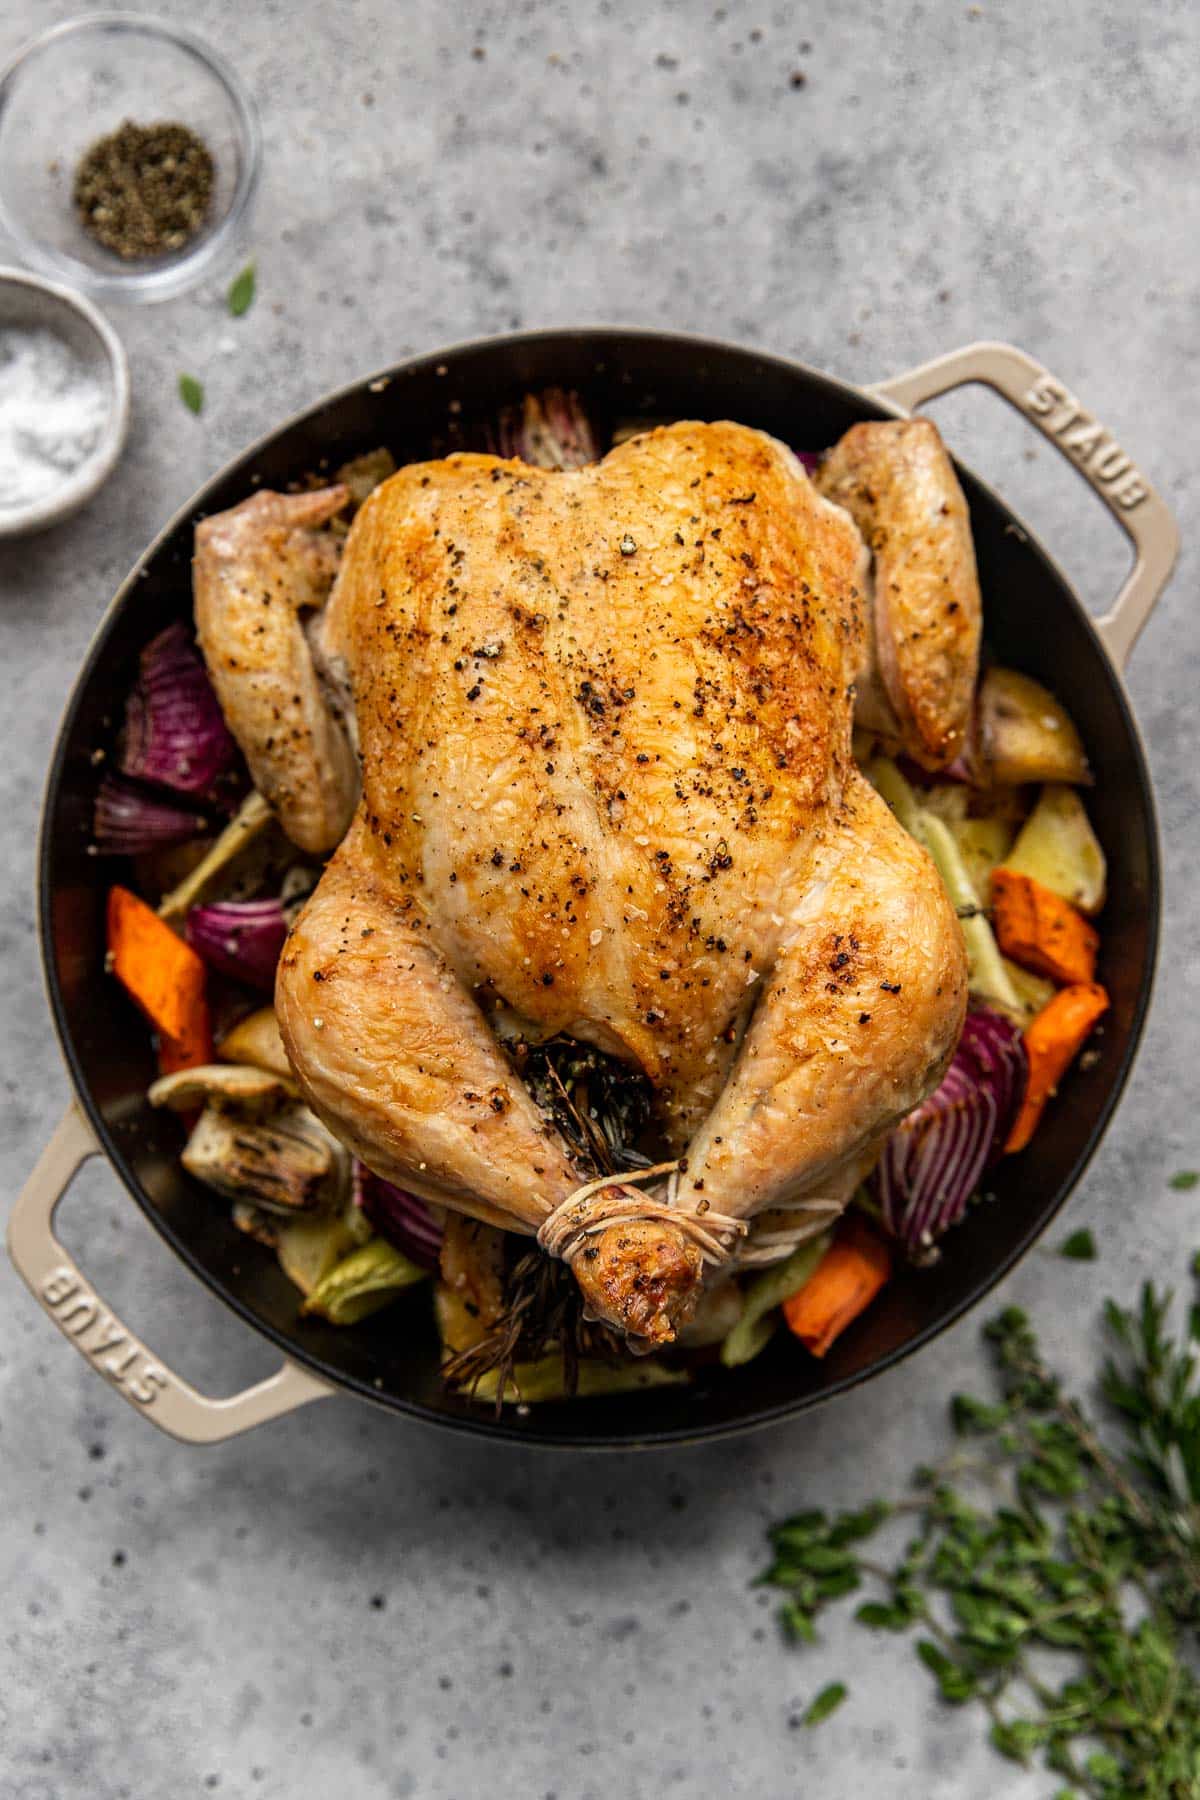 full roasted chicken in a dutch oven surrounded by roasted vegetables